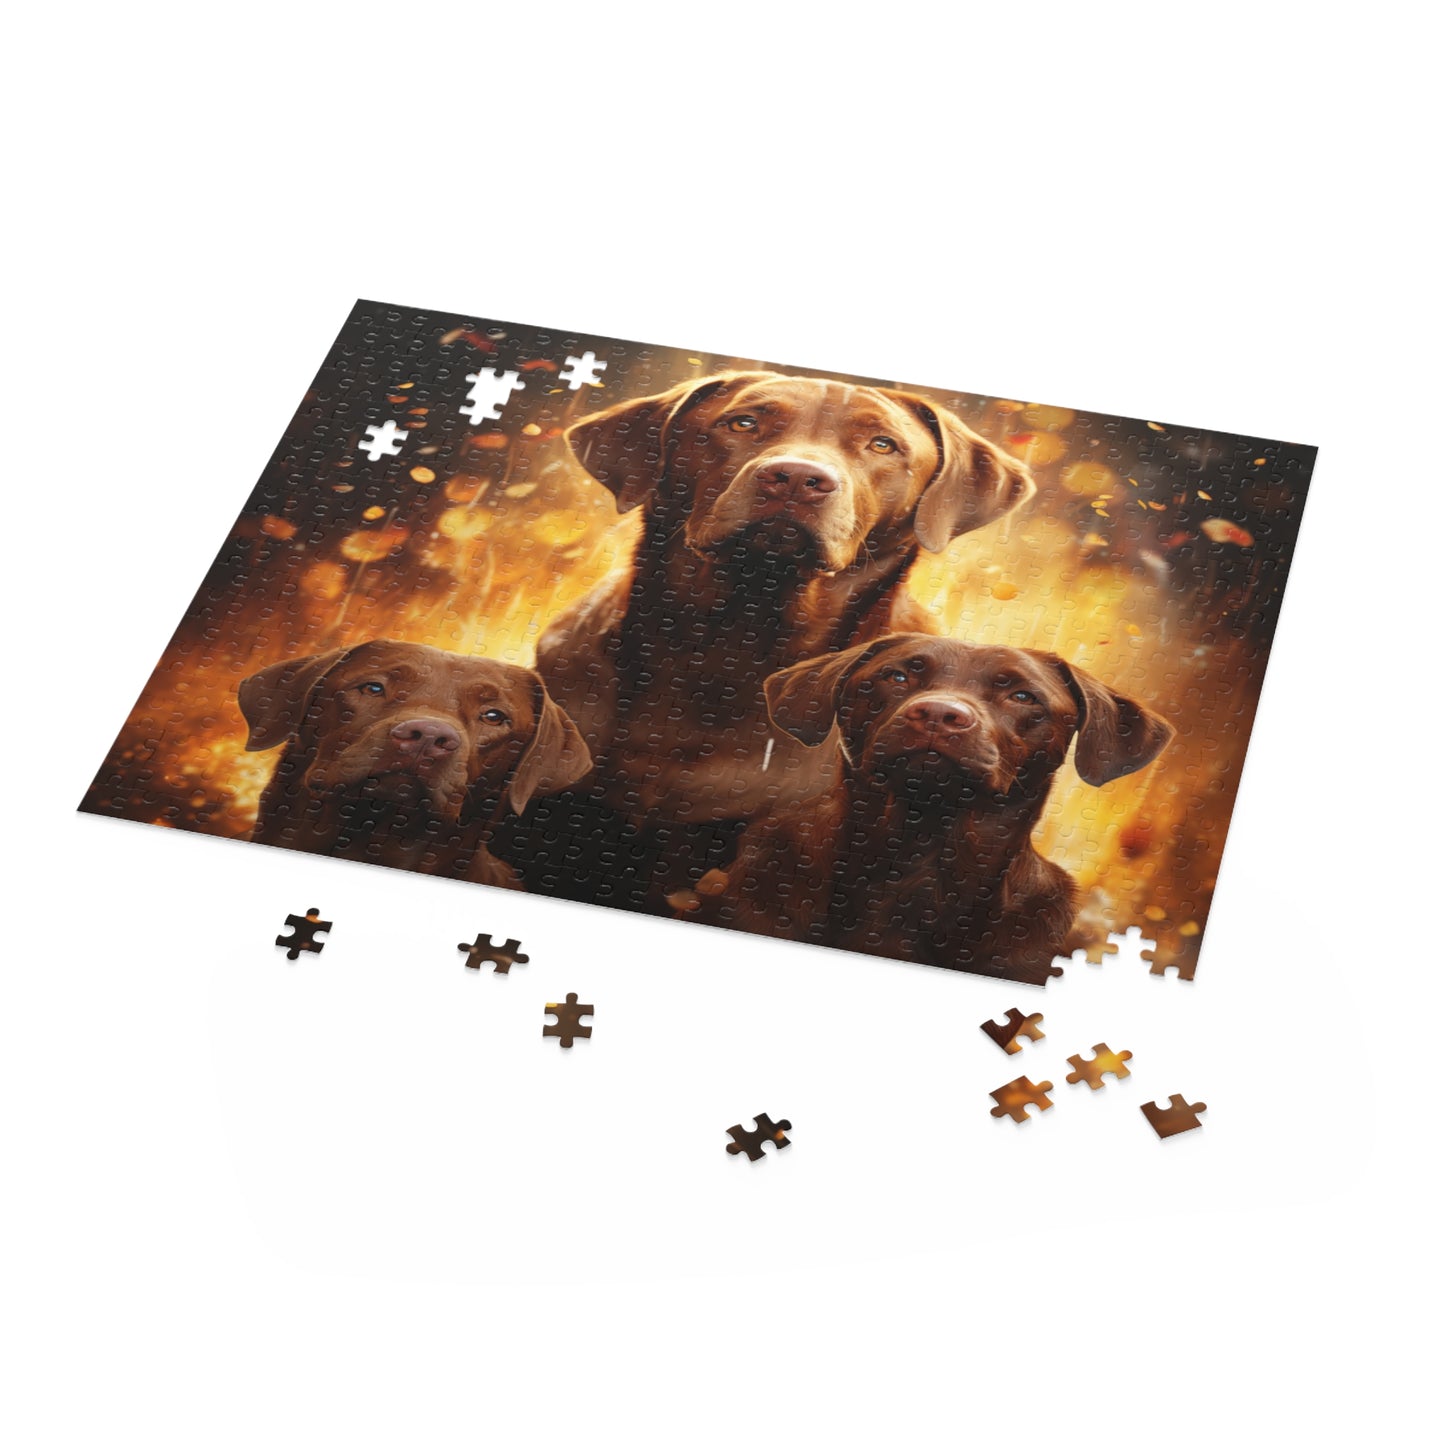 Labrador Vibrant Abstract Watercolor Dog Jigsaw Puzzle for Boys, Girls, Kids Adult Birthday Business Jigsaw Puzzle Gift for Him Funny Humorous Indoor Outdoor Game Gift For Her Online-5